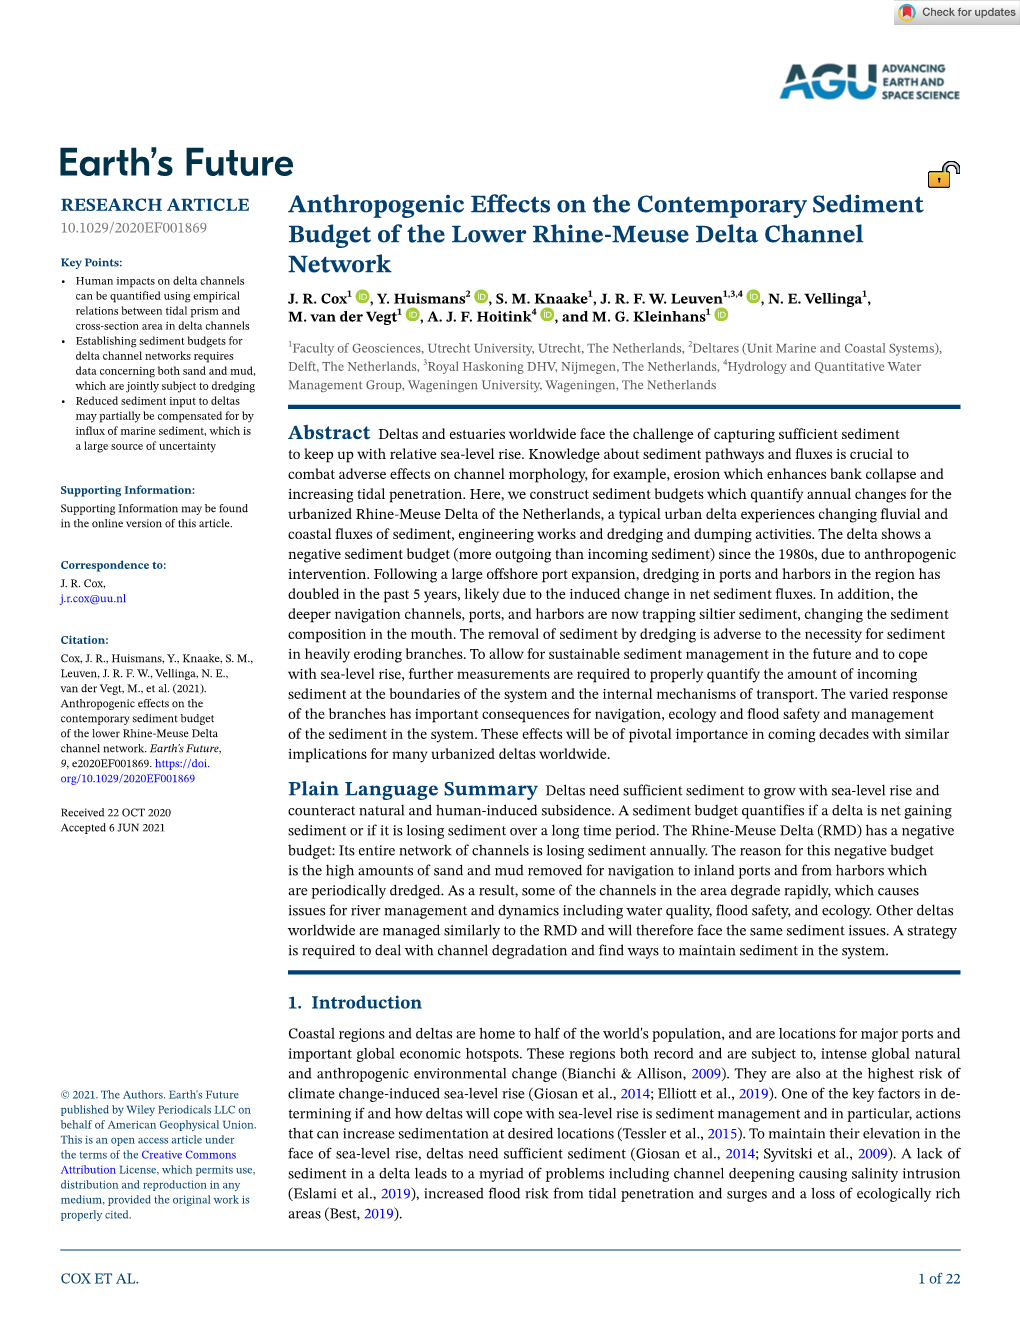 Anthropogenic Effects on the Contemporary Sediment Budget Of